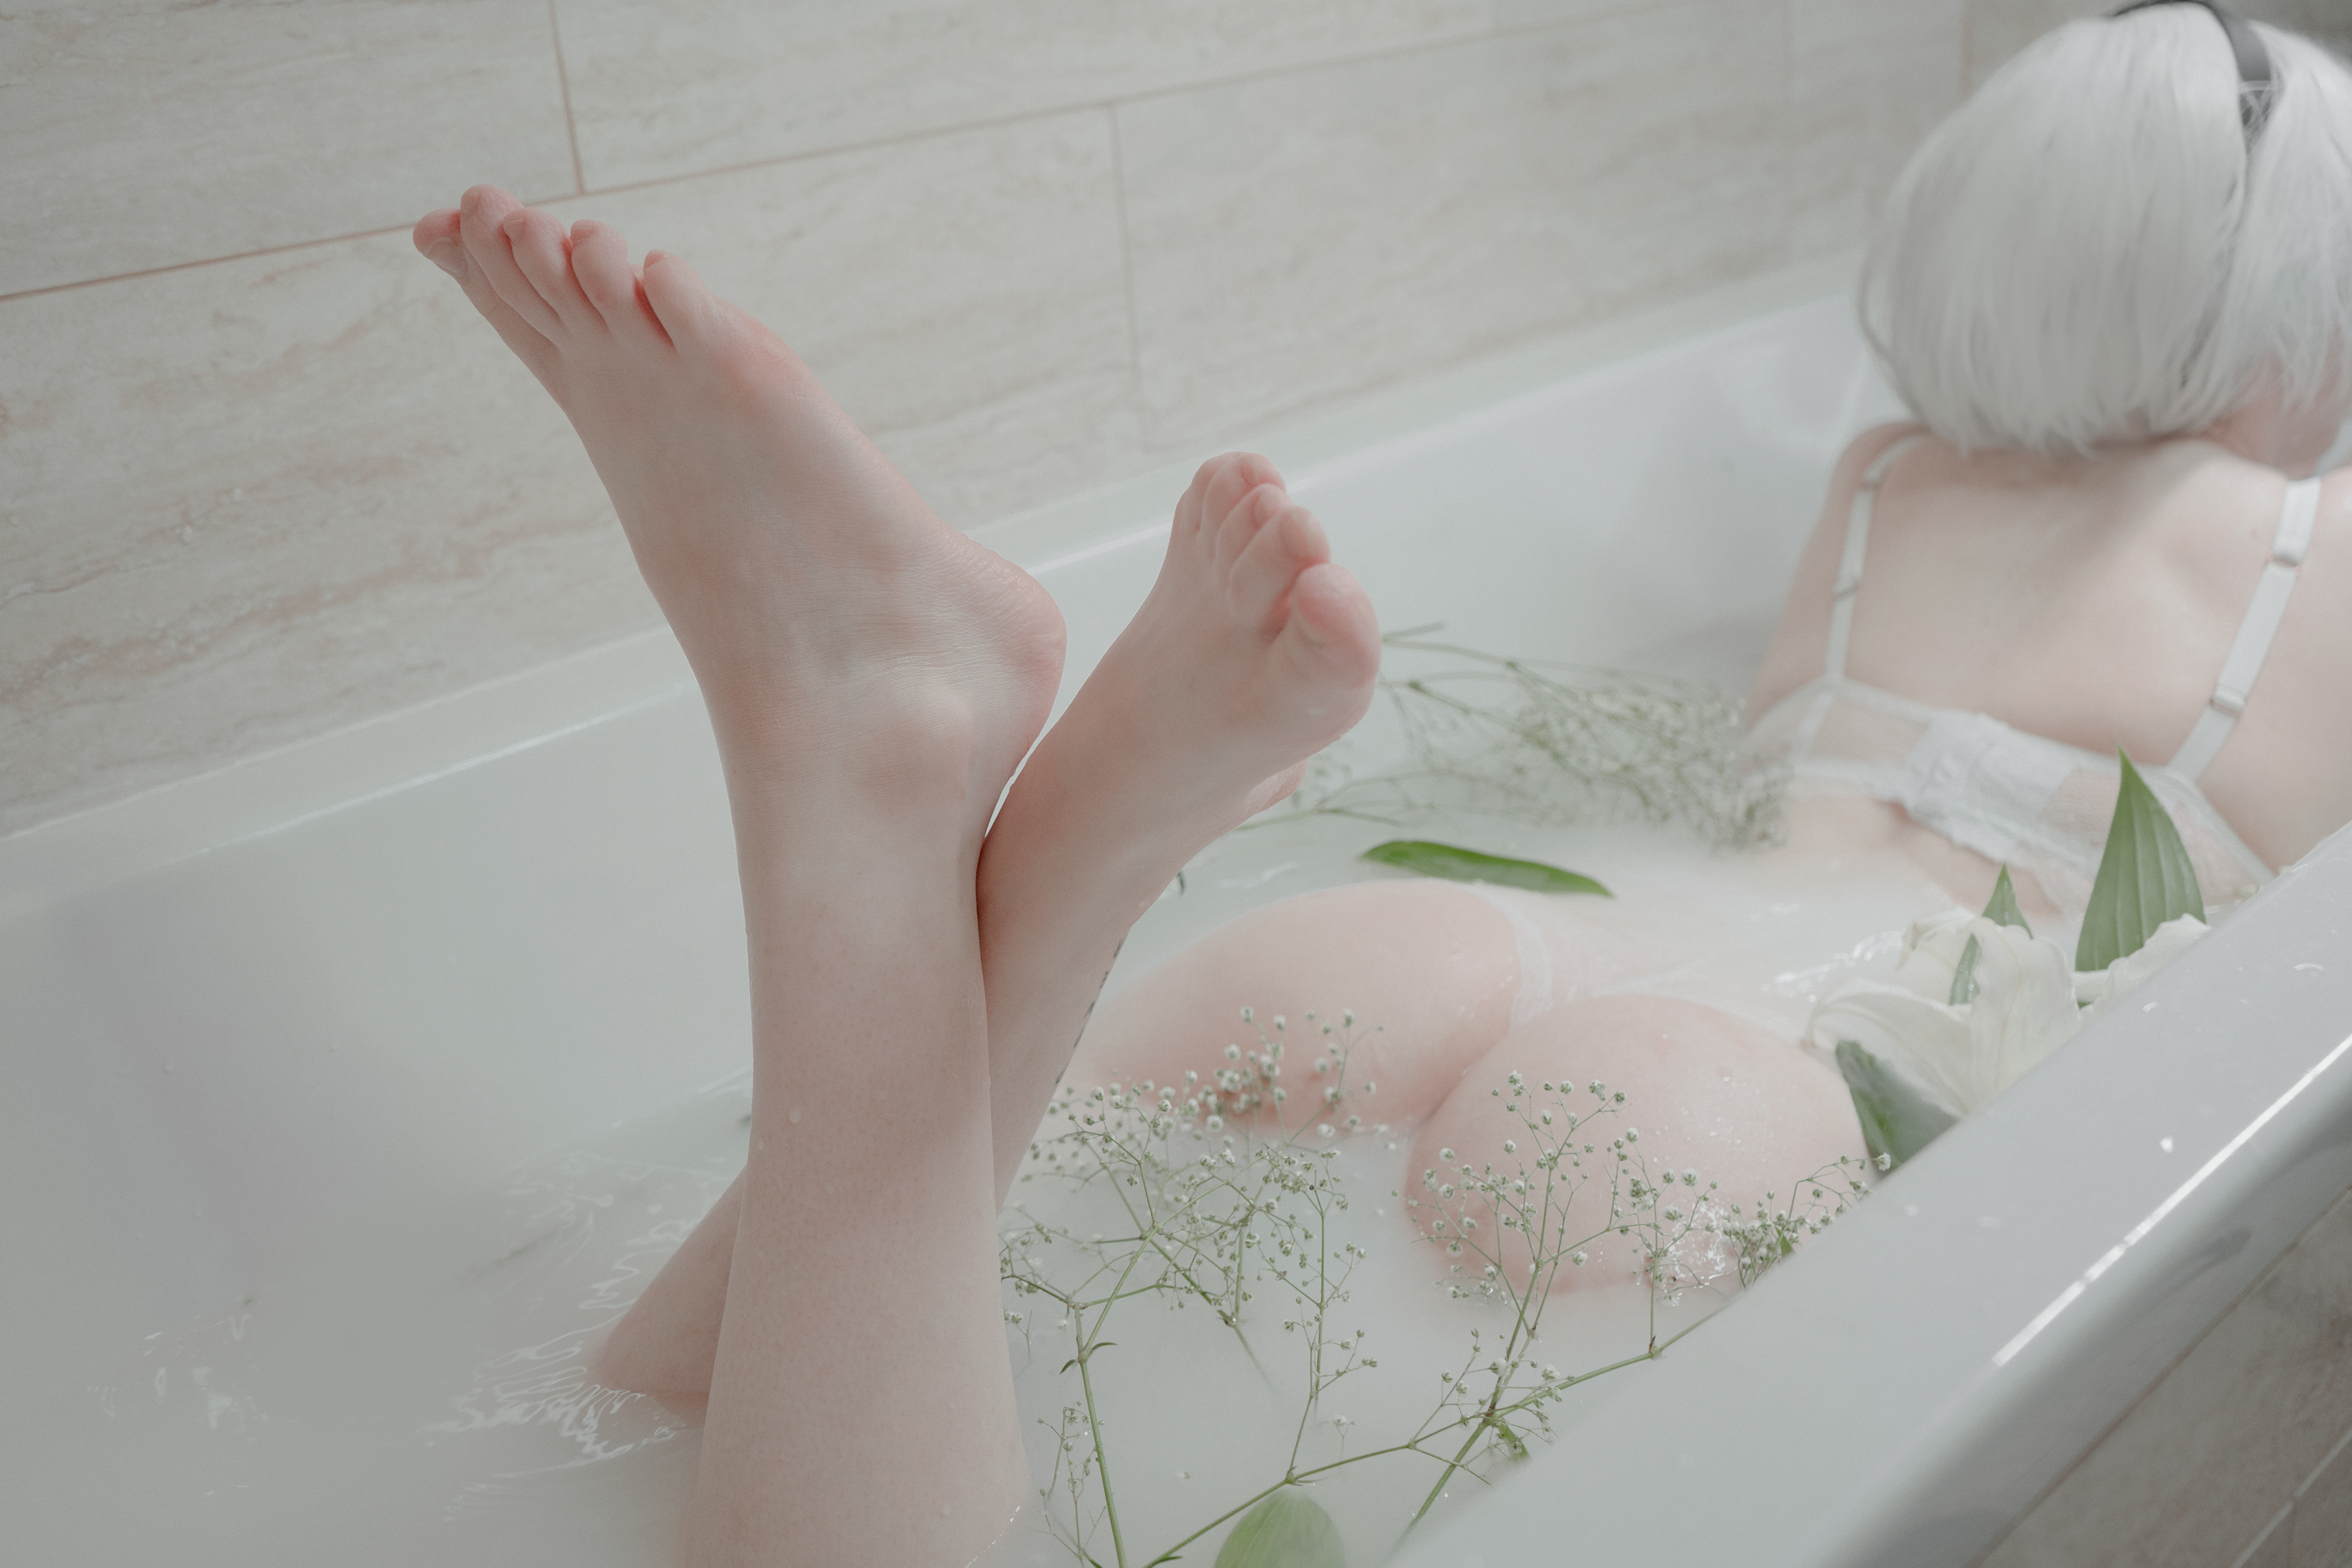 People 3750x2500 women model wet body Nier: Automata 2B (Nier: Automata) bathtub in bathtub flowers ass legs feet indoors pointed toes pale Alina Becker cosplay